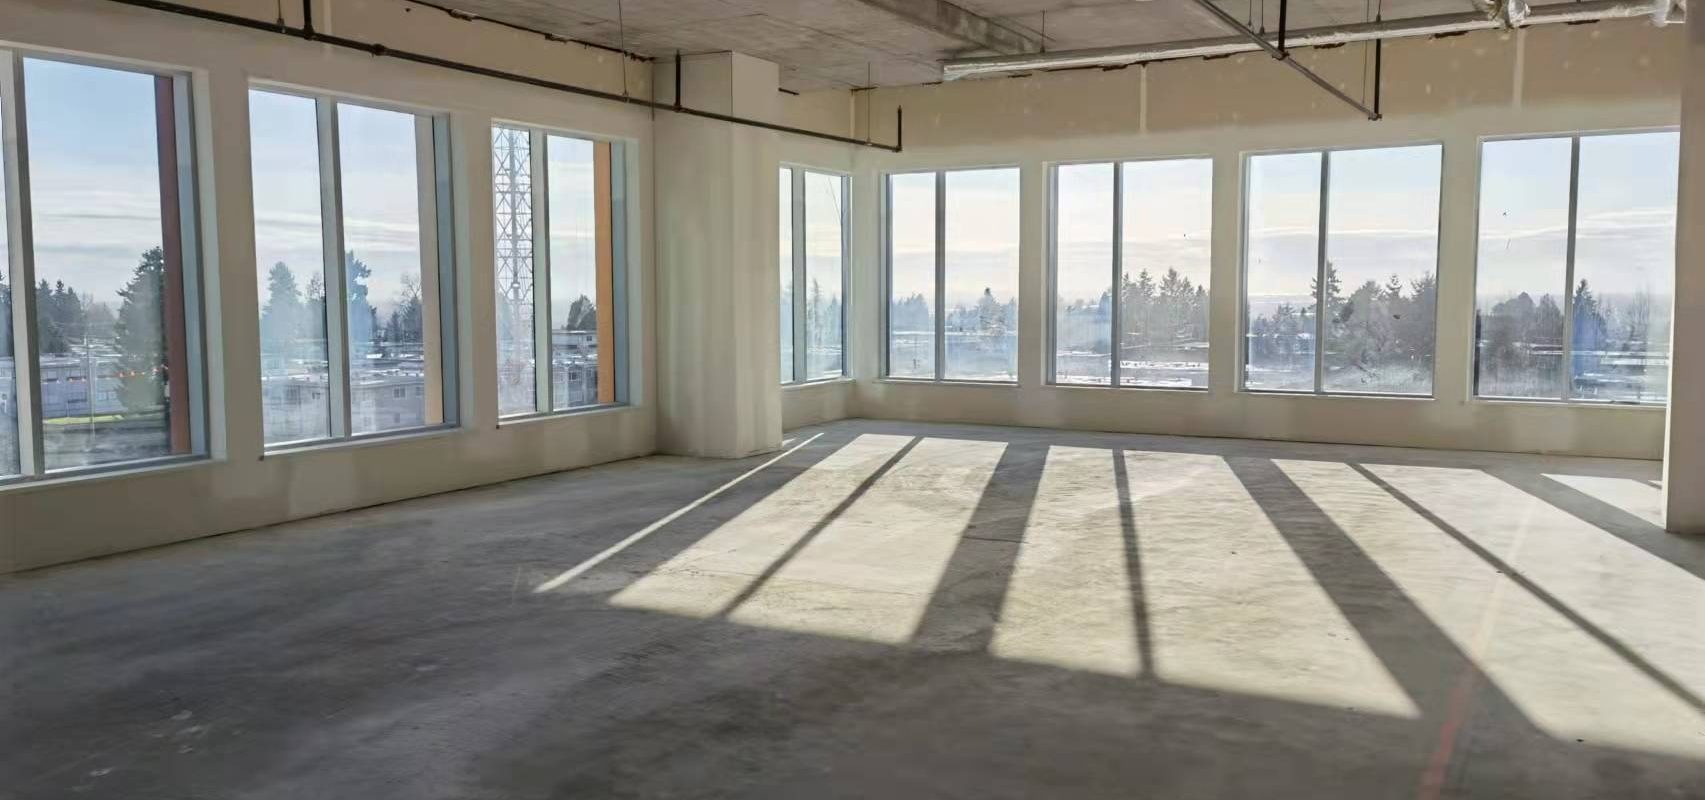 【Central Burnaby】2-Sunny Side 1400 sqft Commercial Office for Lease